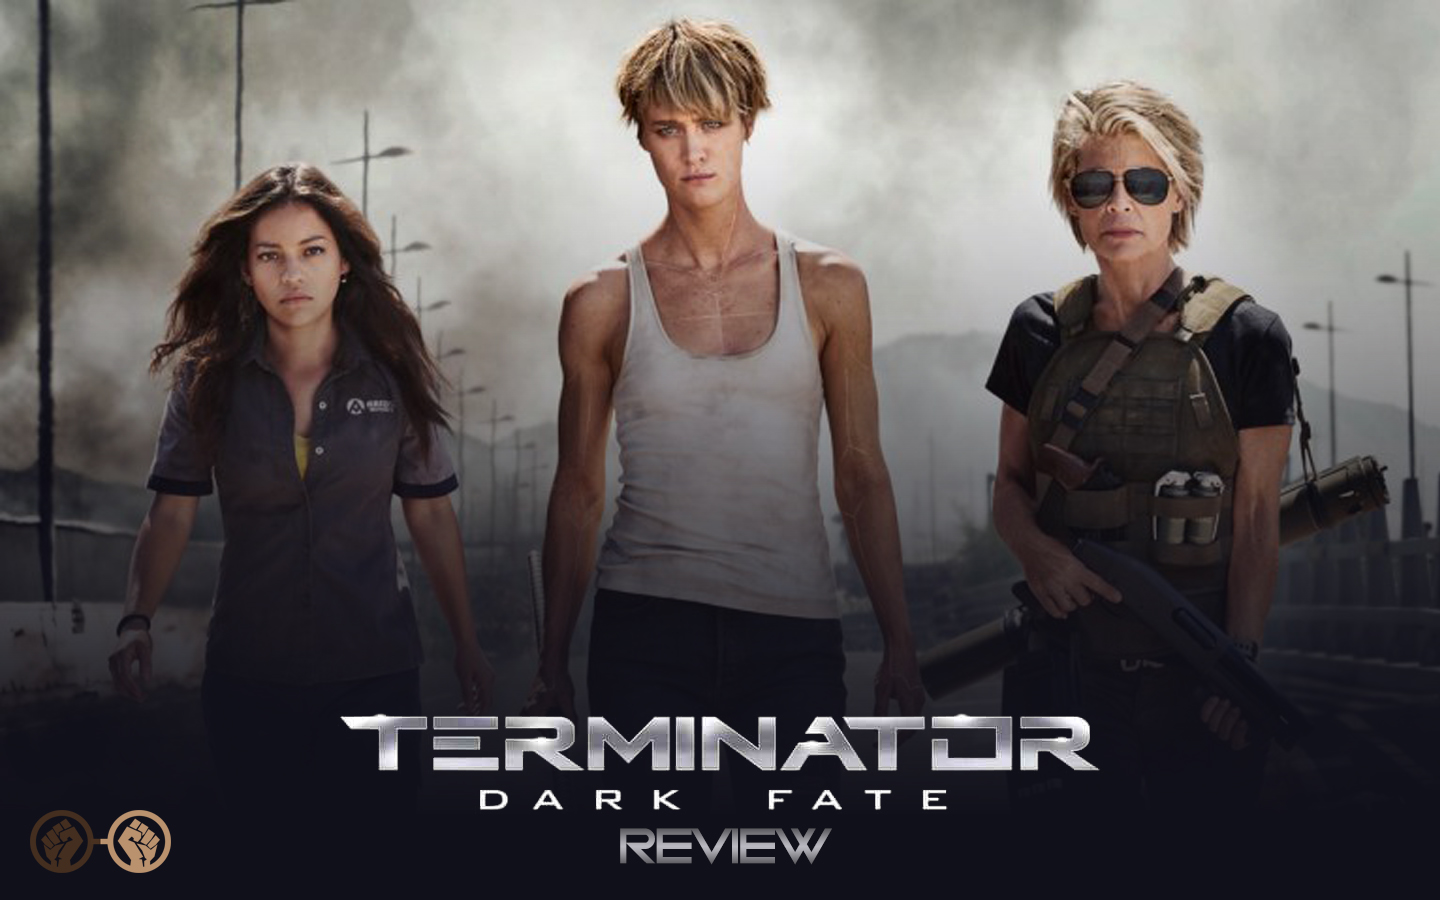 A New Generation Reignites The Franchise in ‘Terminator: Dark Fate’ – Review